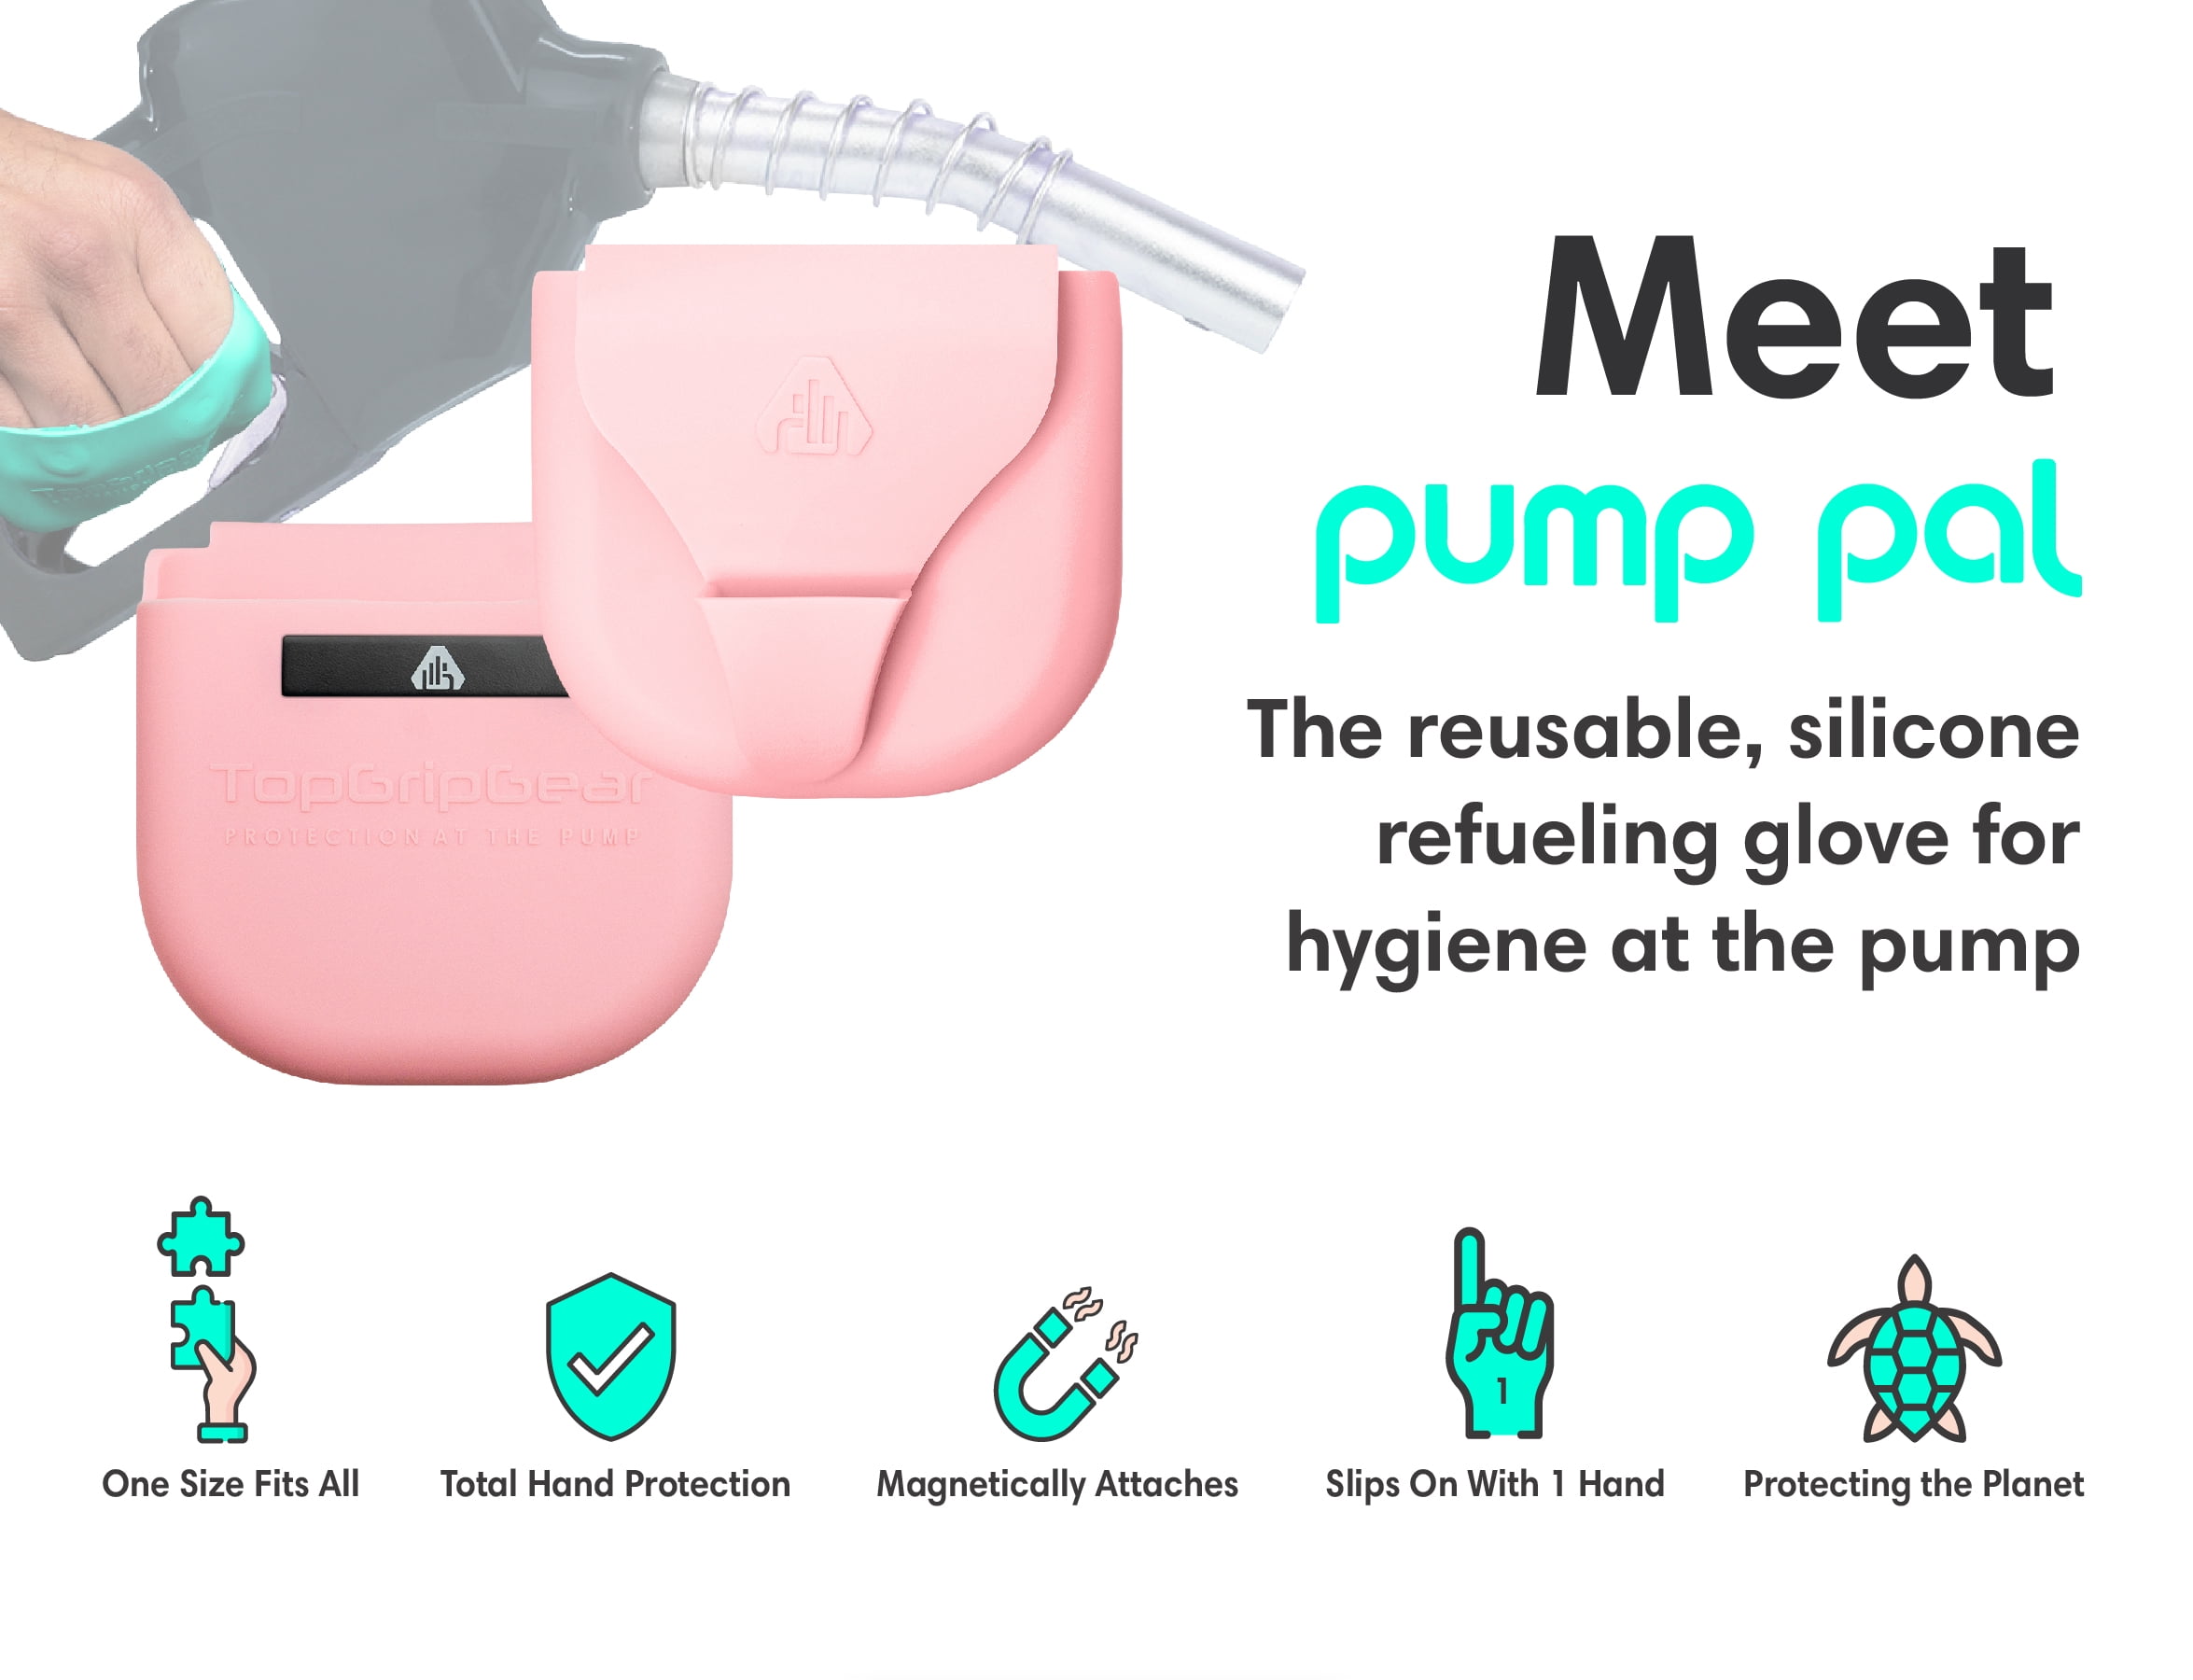 One Hand Easy Slip-On | Pump Pal Reusable Fueling Glove Protect Hands from Filthy Gas Pump Handles and Keypads Easy Install Pink Attaches with Magnets Inside Your Gas Tank Universal Size 